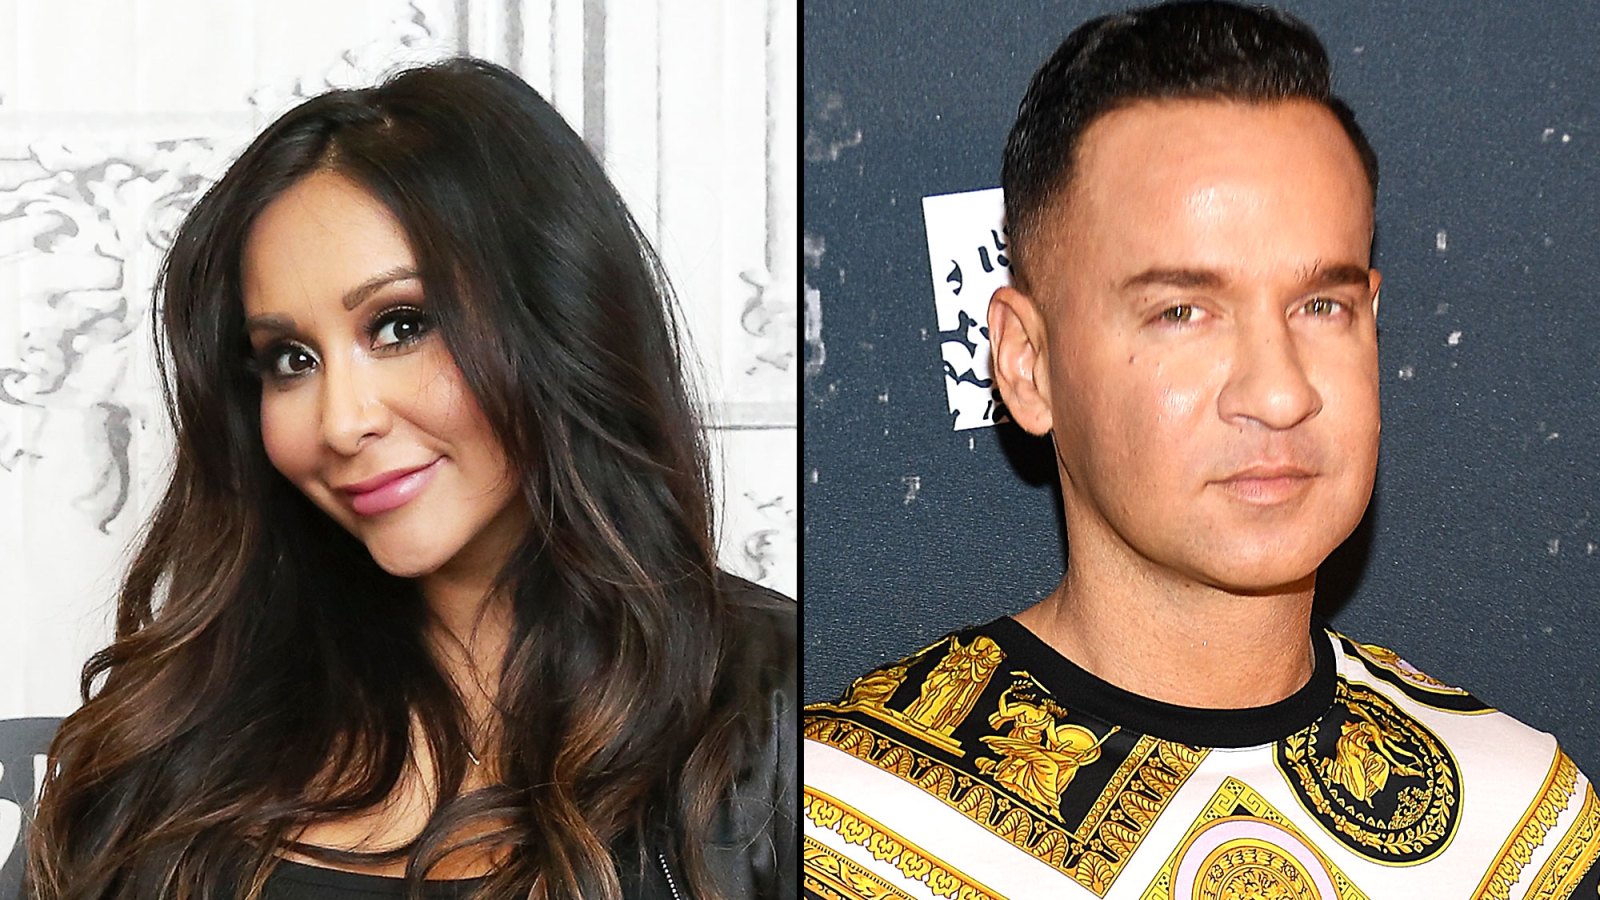 Nicole ‘Snooki’ Polizzi Says Mike ‘The Situation’ Sorrentino Is ‘Having the Time of His Life’ in Prison